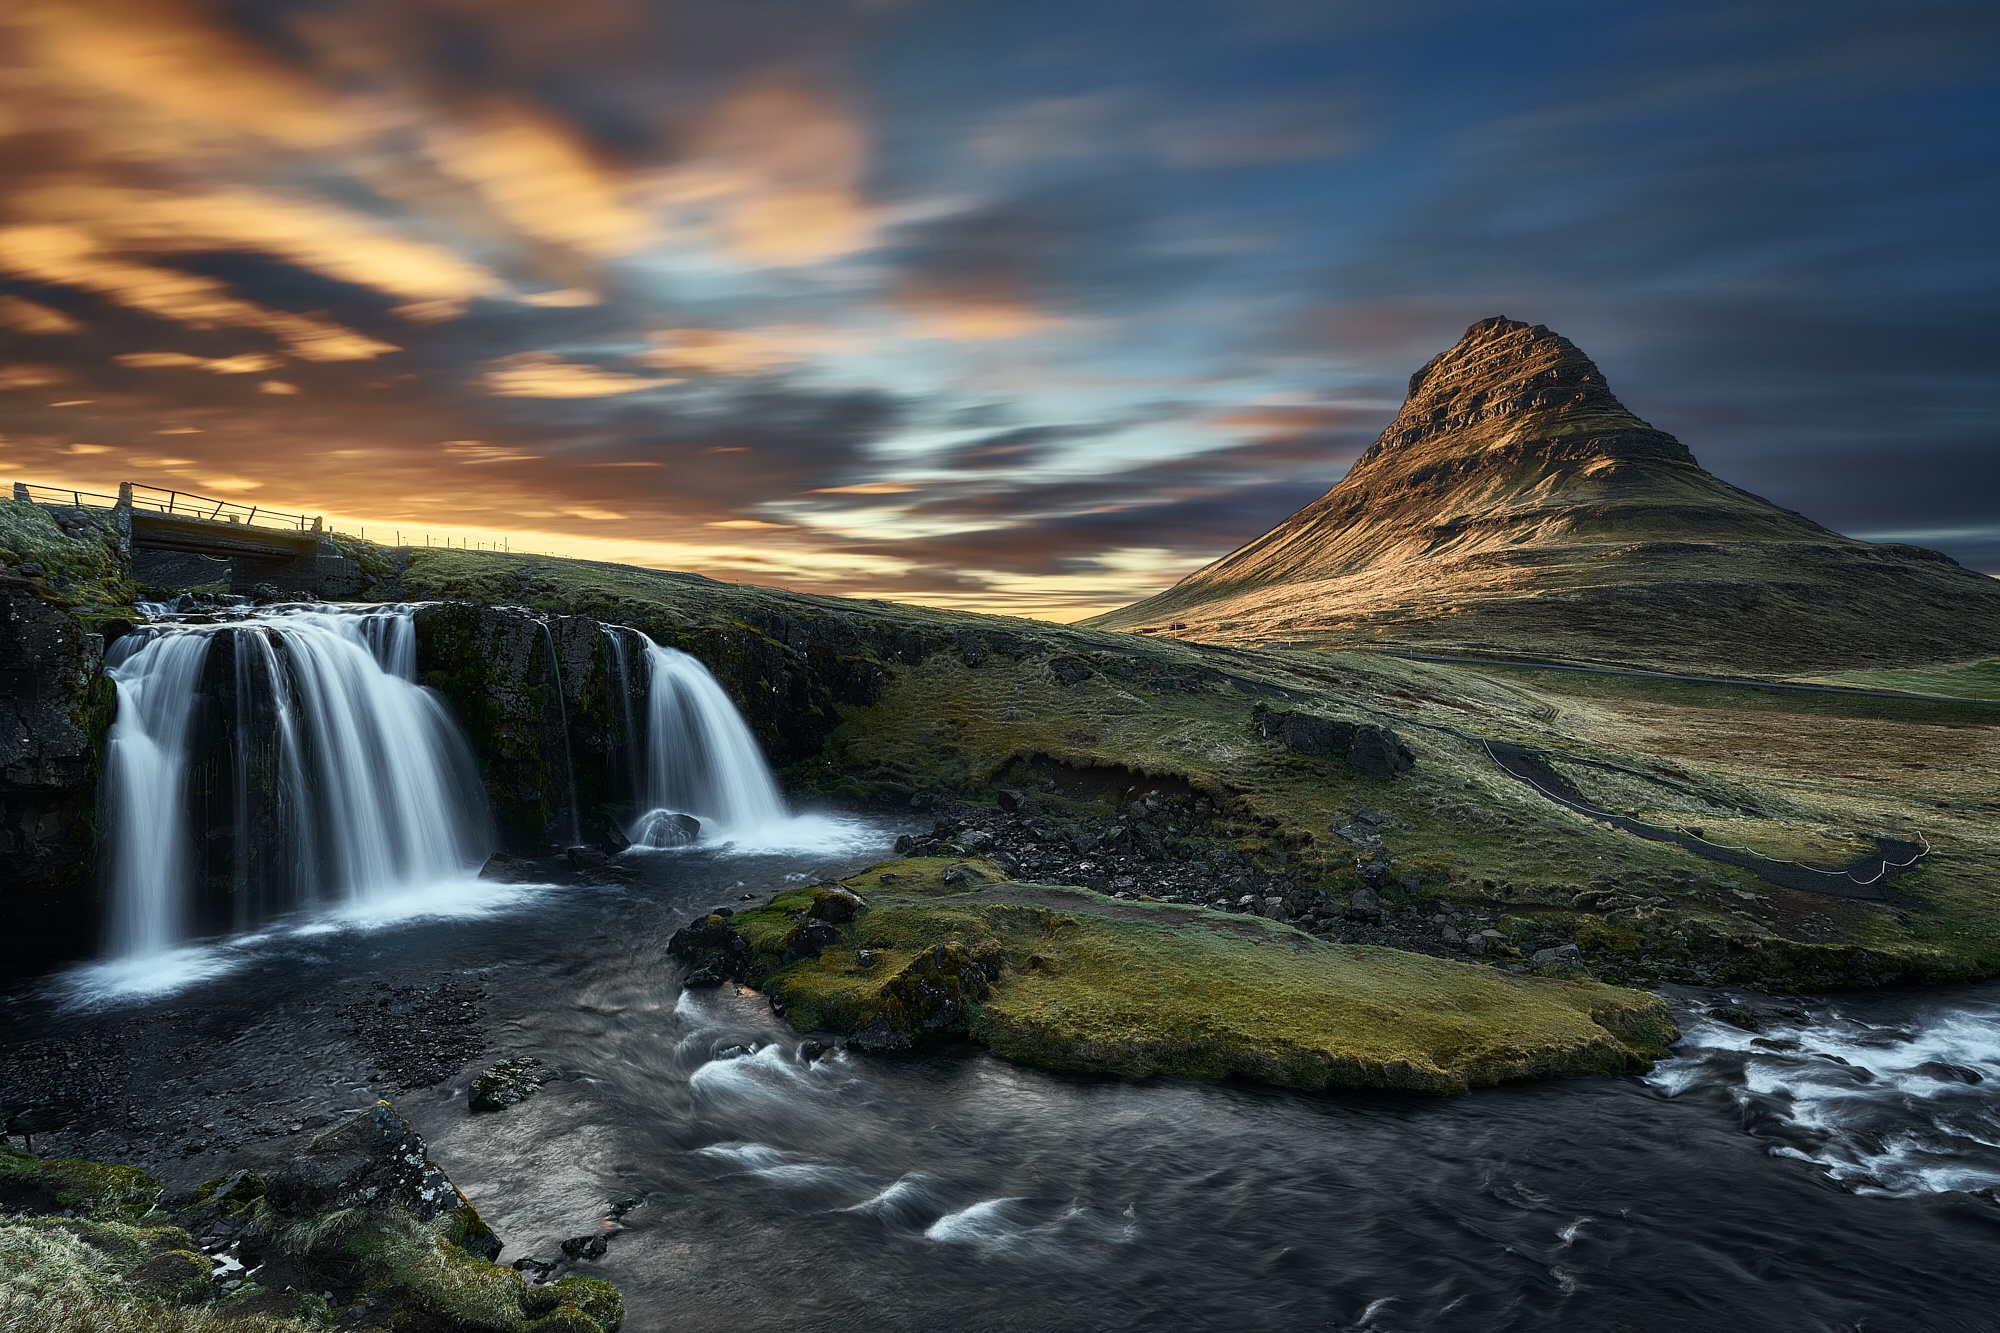 Kirkjufell, a 463 m high mountain, claimed to be the most photographed mountain in the country by EtienneR68